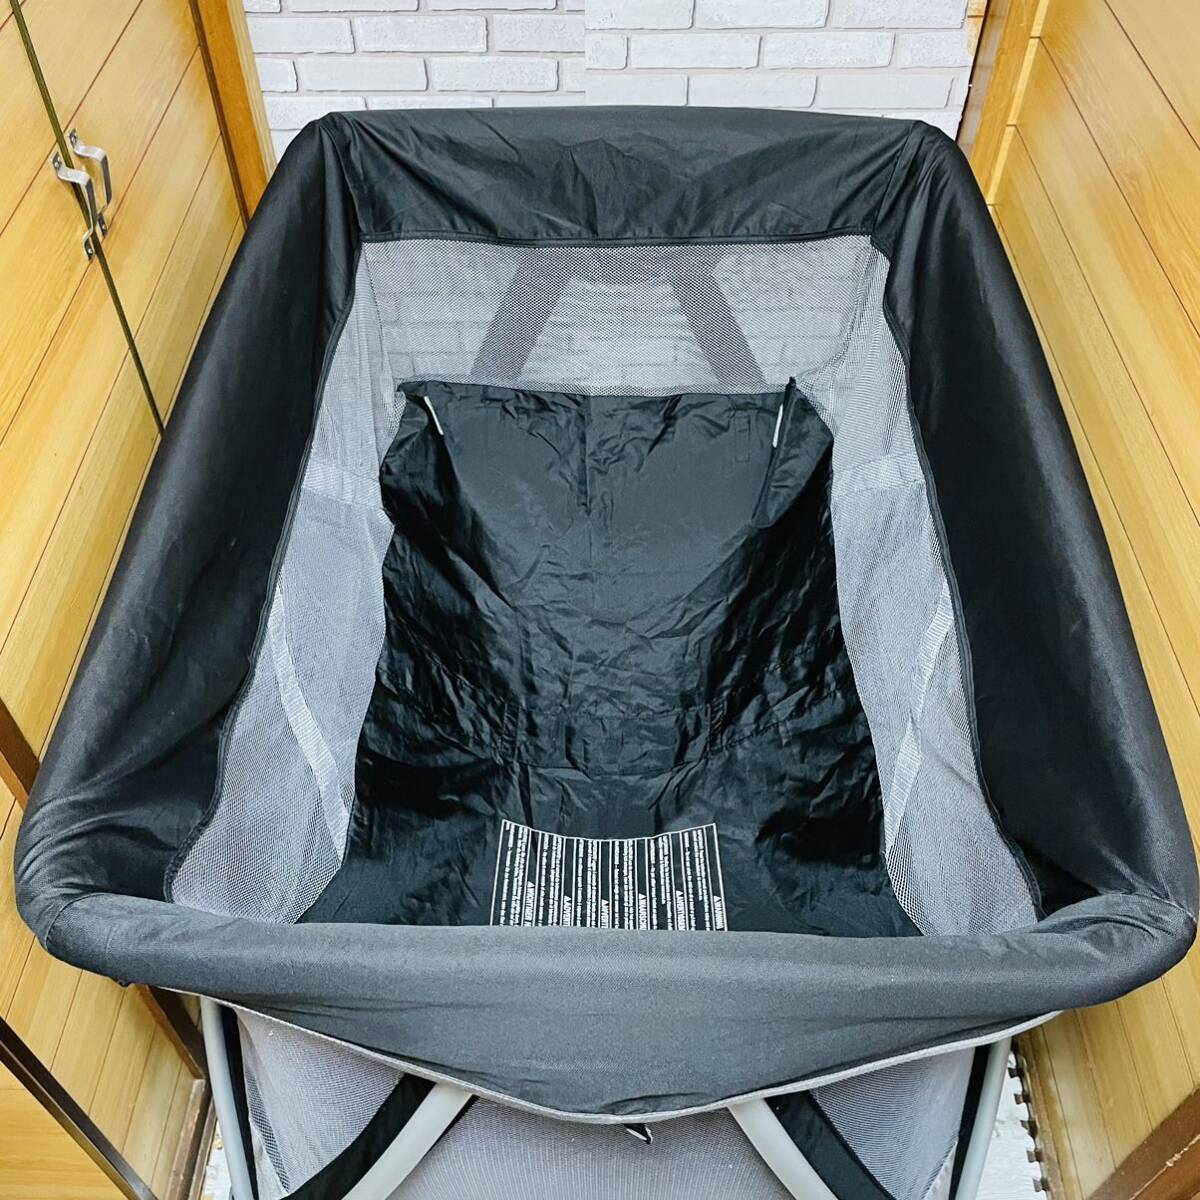  prompt decision use 5 months nna travel cot Senna crib compact postage included 7000 jpy . discounted first come, first served nuna sena